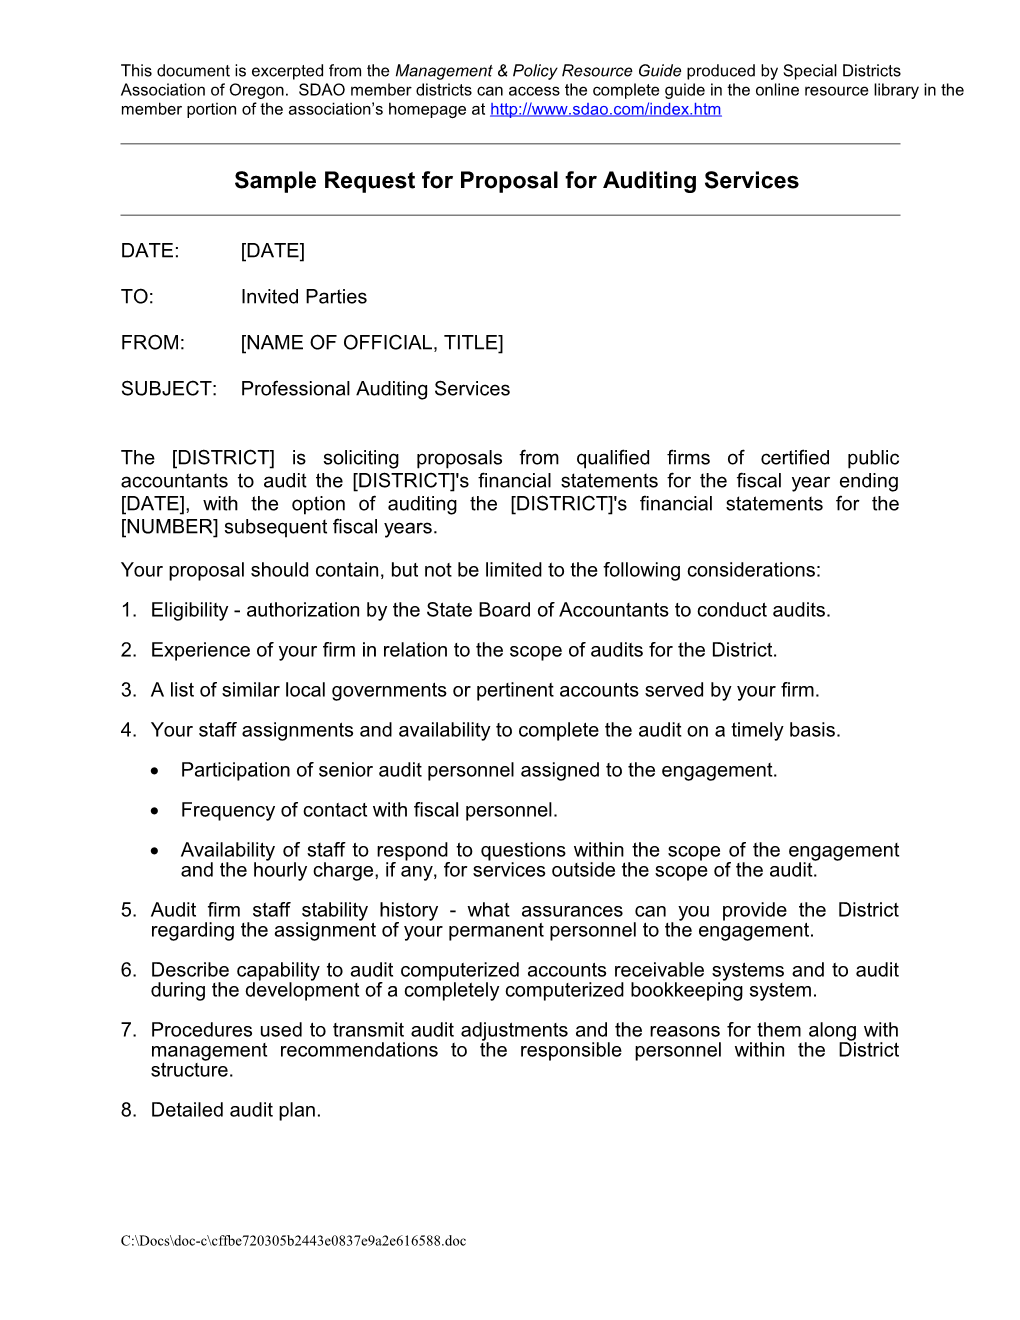 Sample Request for Proposal for Auditing Services